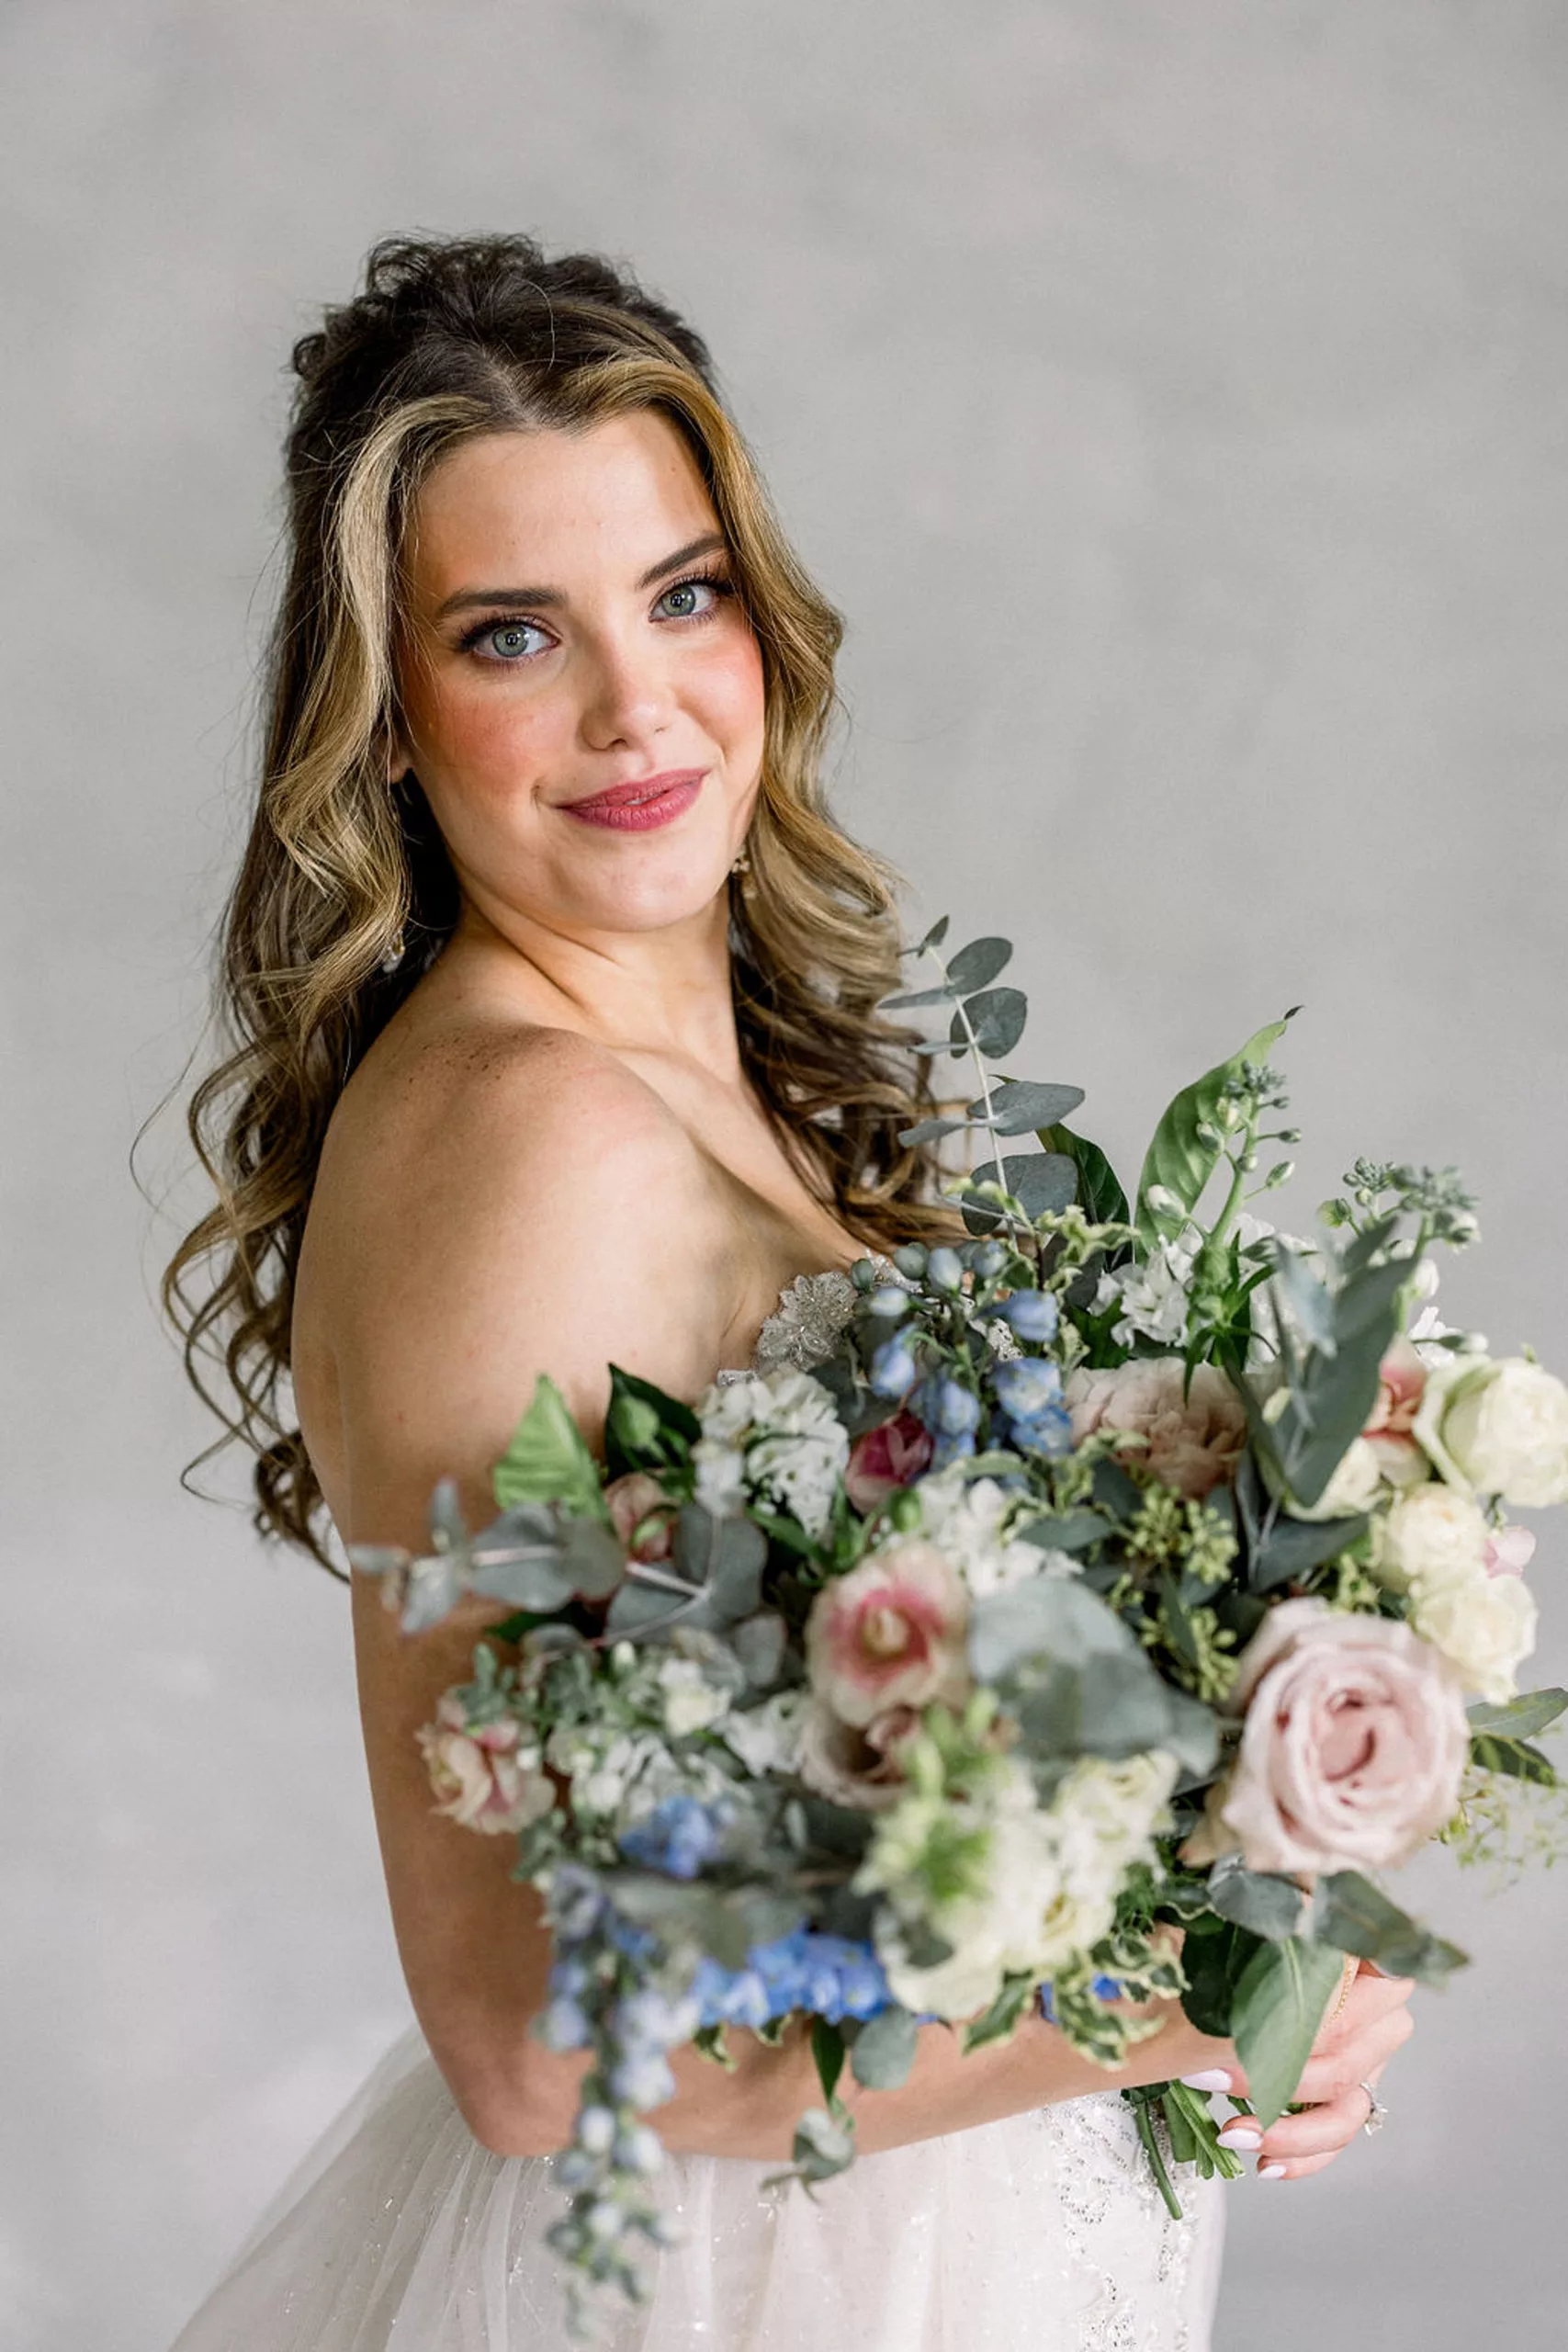 A bride stands holding her large bouquet